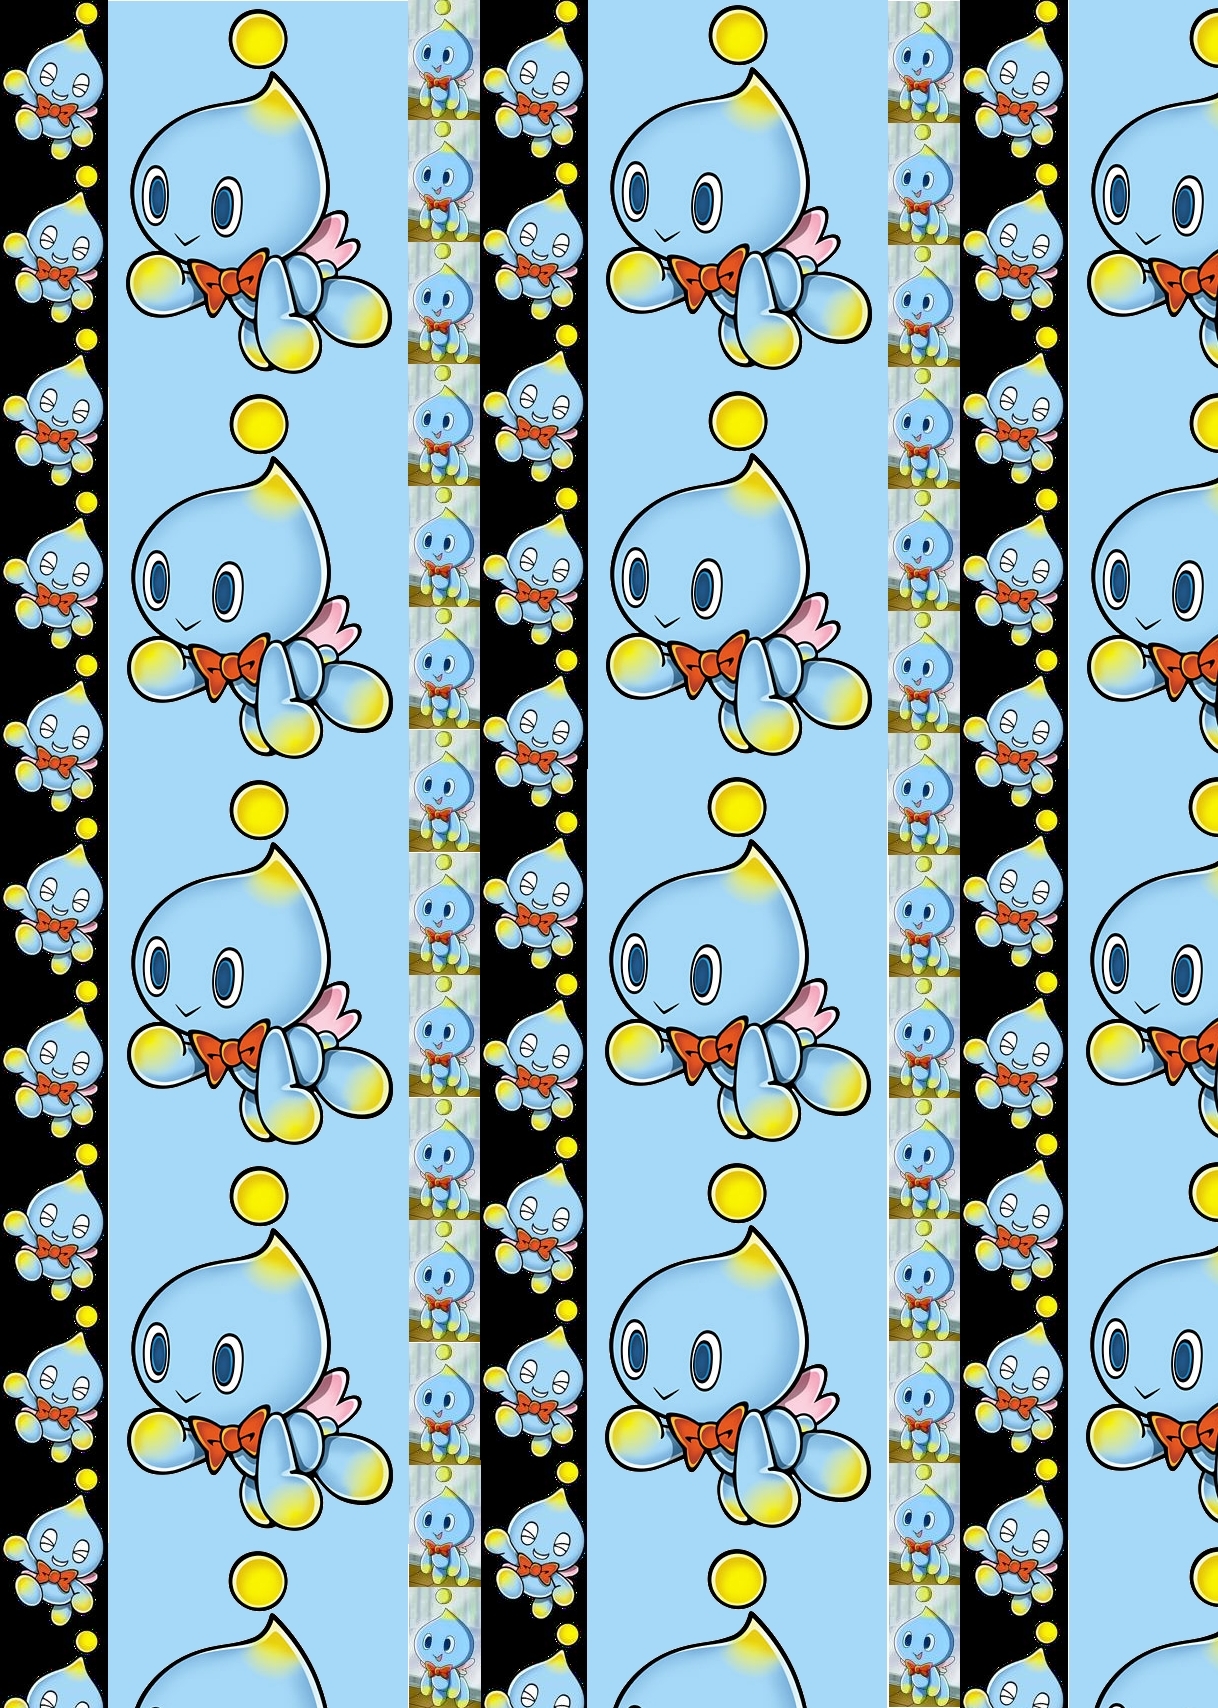 cheese the chao wall paper! Cheese the chao Photo